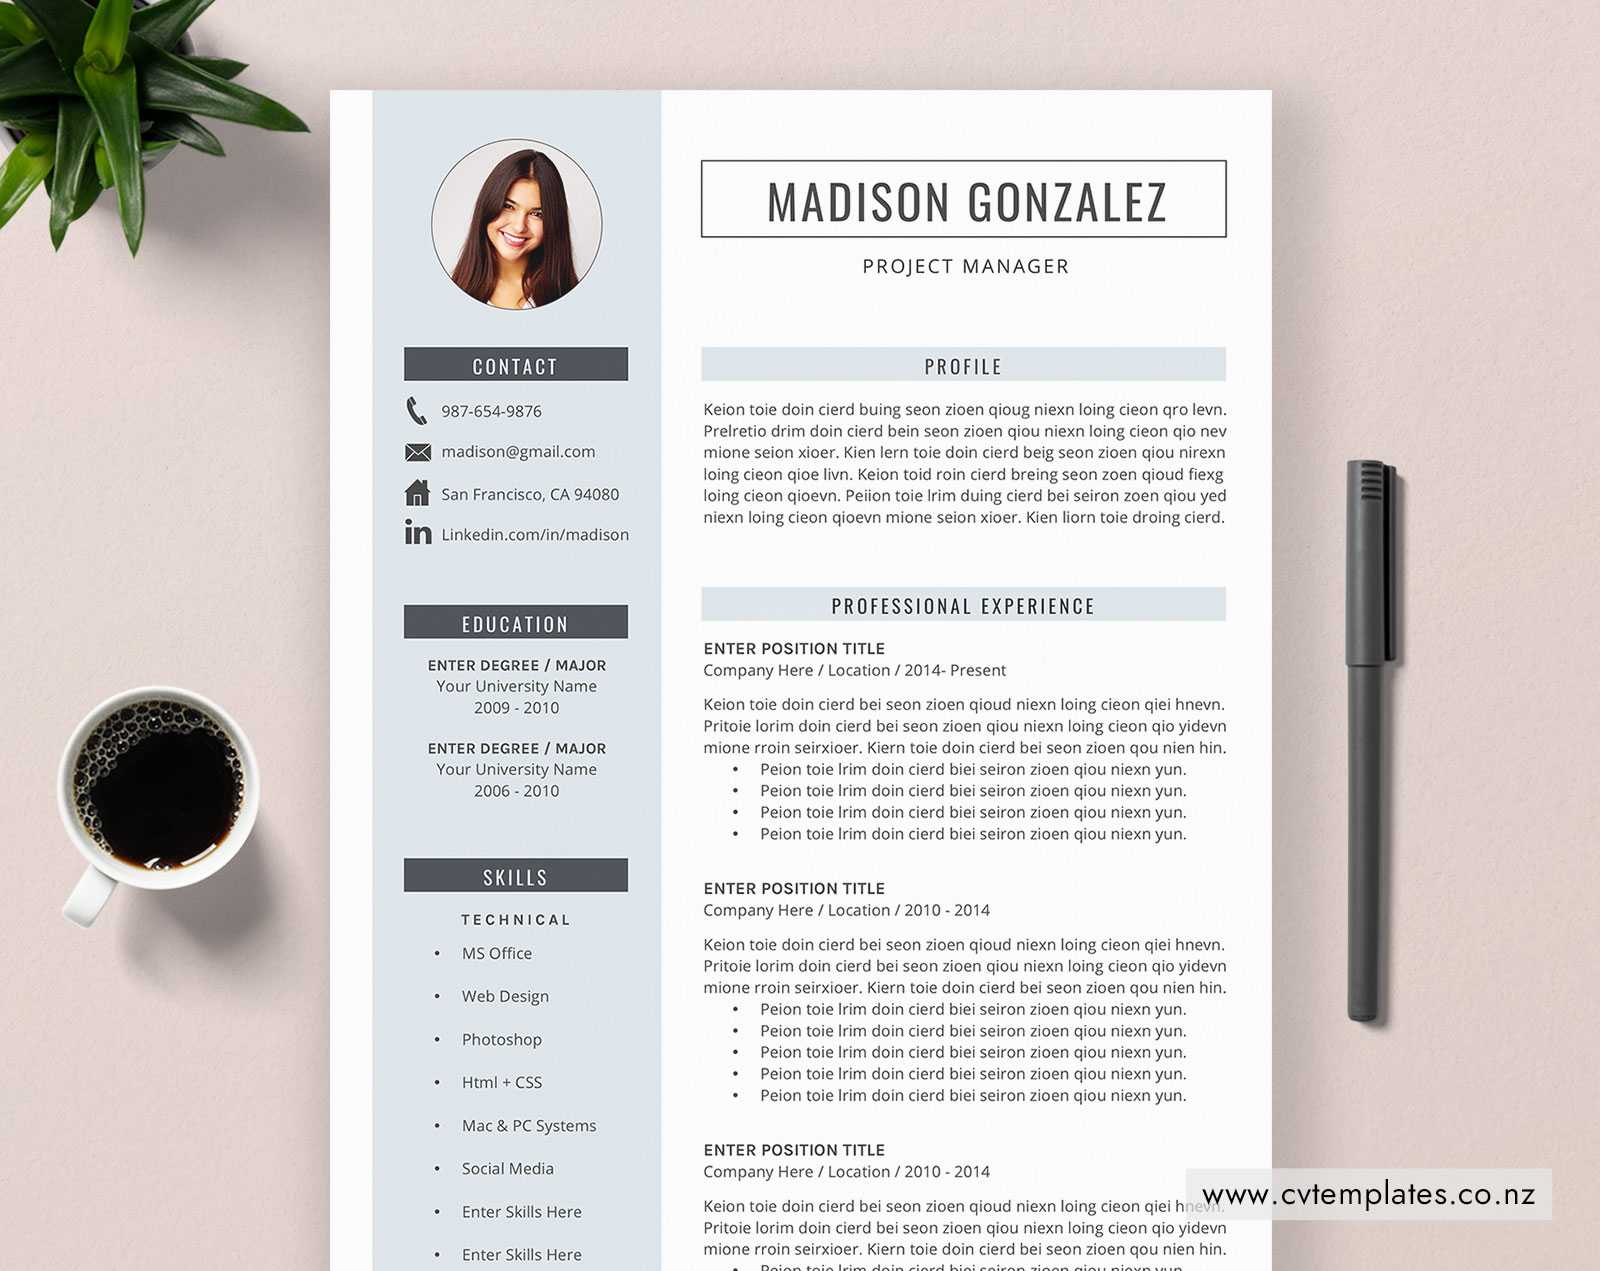 Cv Template, Professional Curriculum Vitae, Minimalist Cv Template Design,  Ms Word, Cover Letter, 1, 2 And 3 Page, Simple Resume Template, Instant Regarding How To Make A Cv Template On Microsoft Word